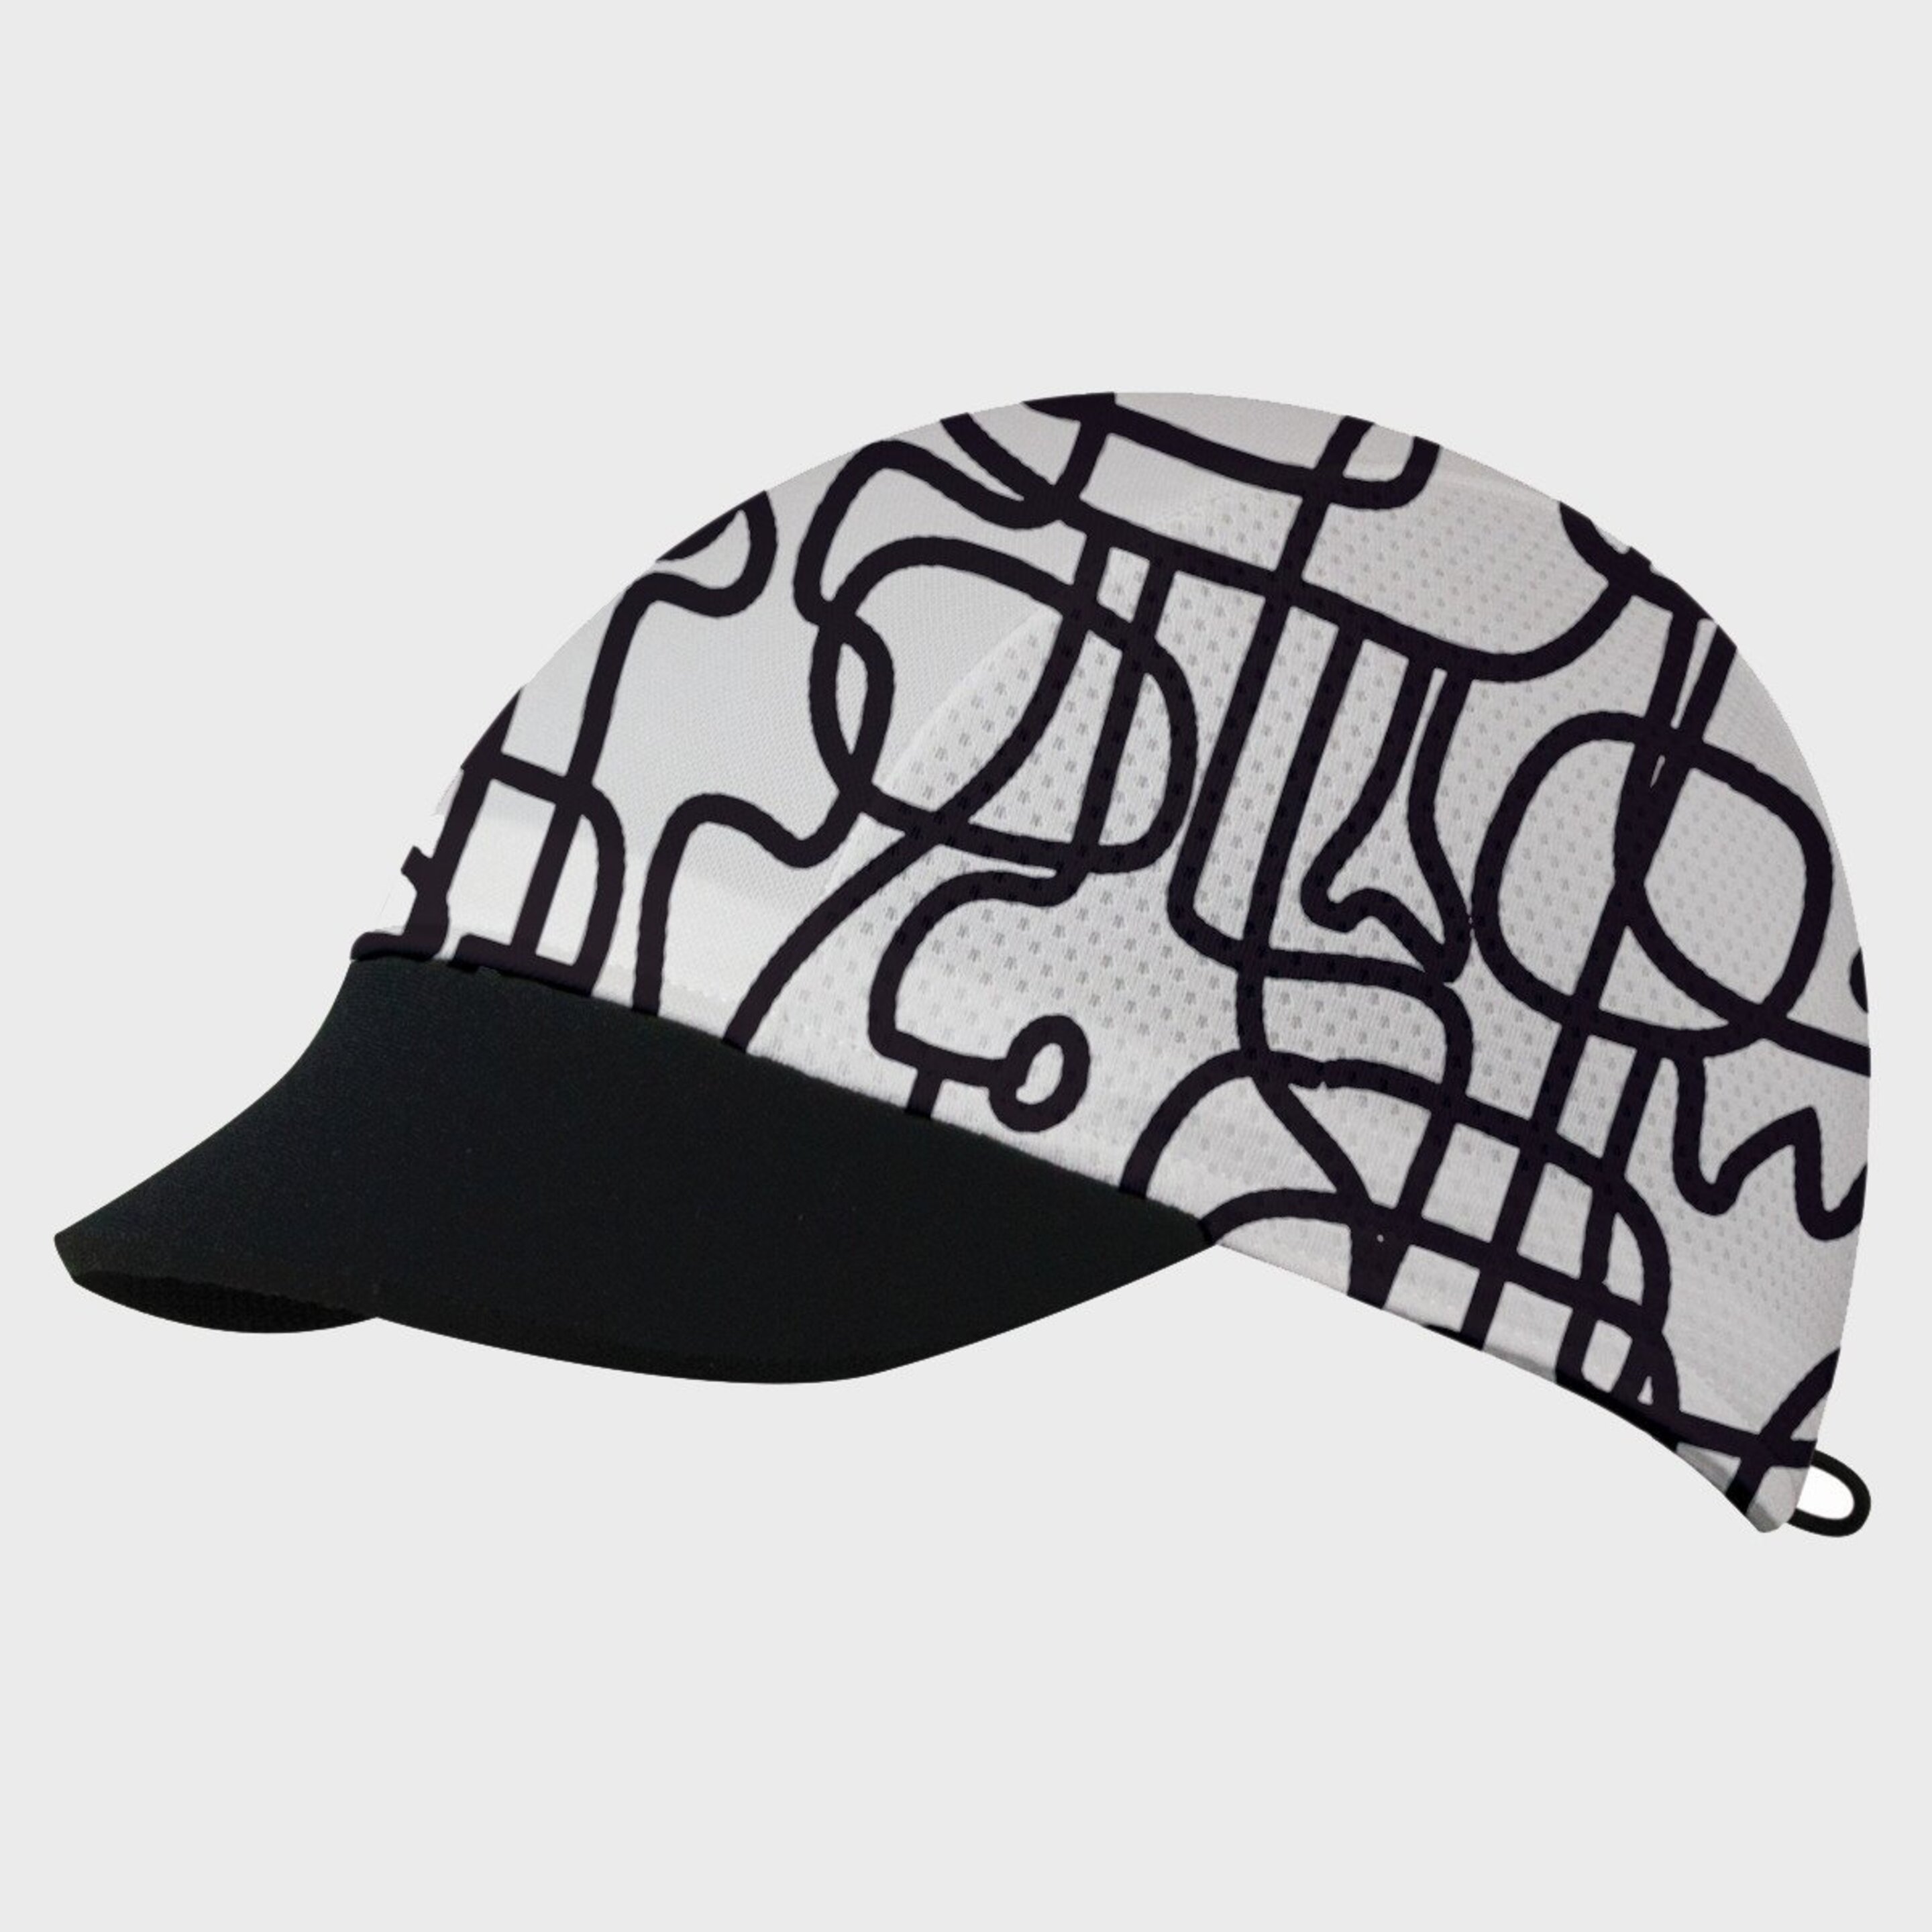 Coolcap Black And White